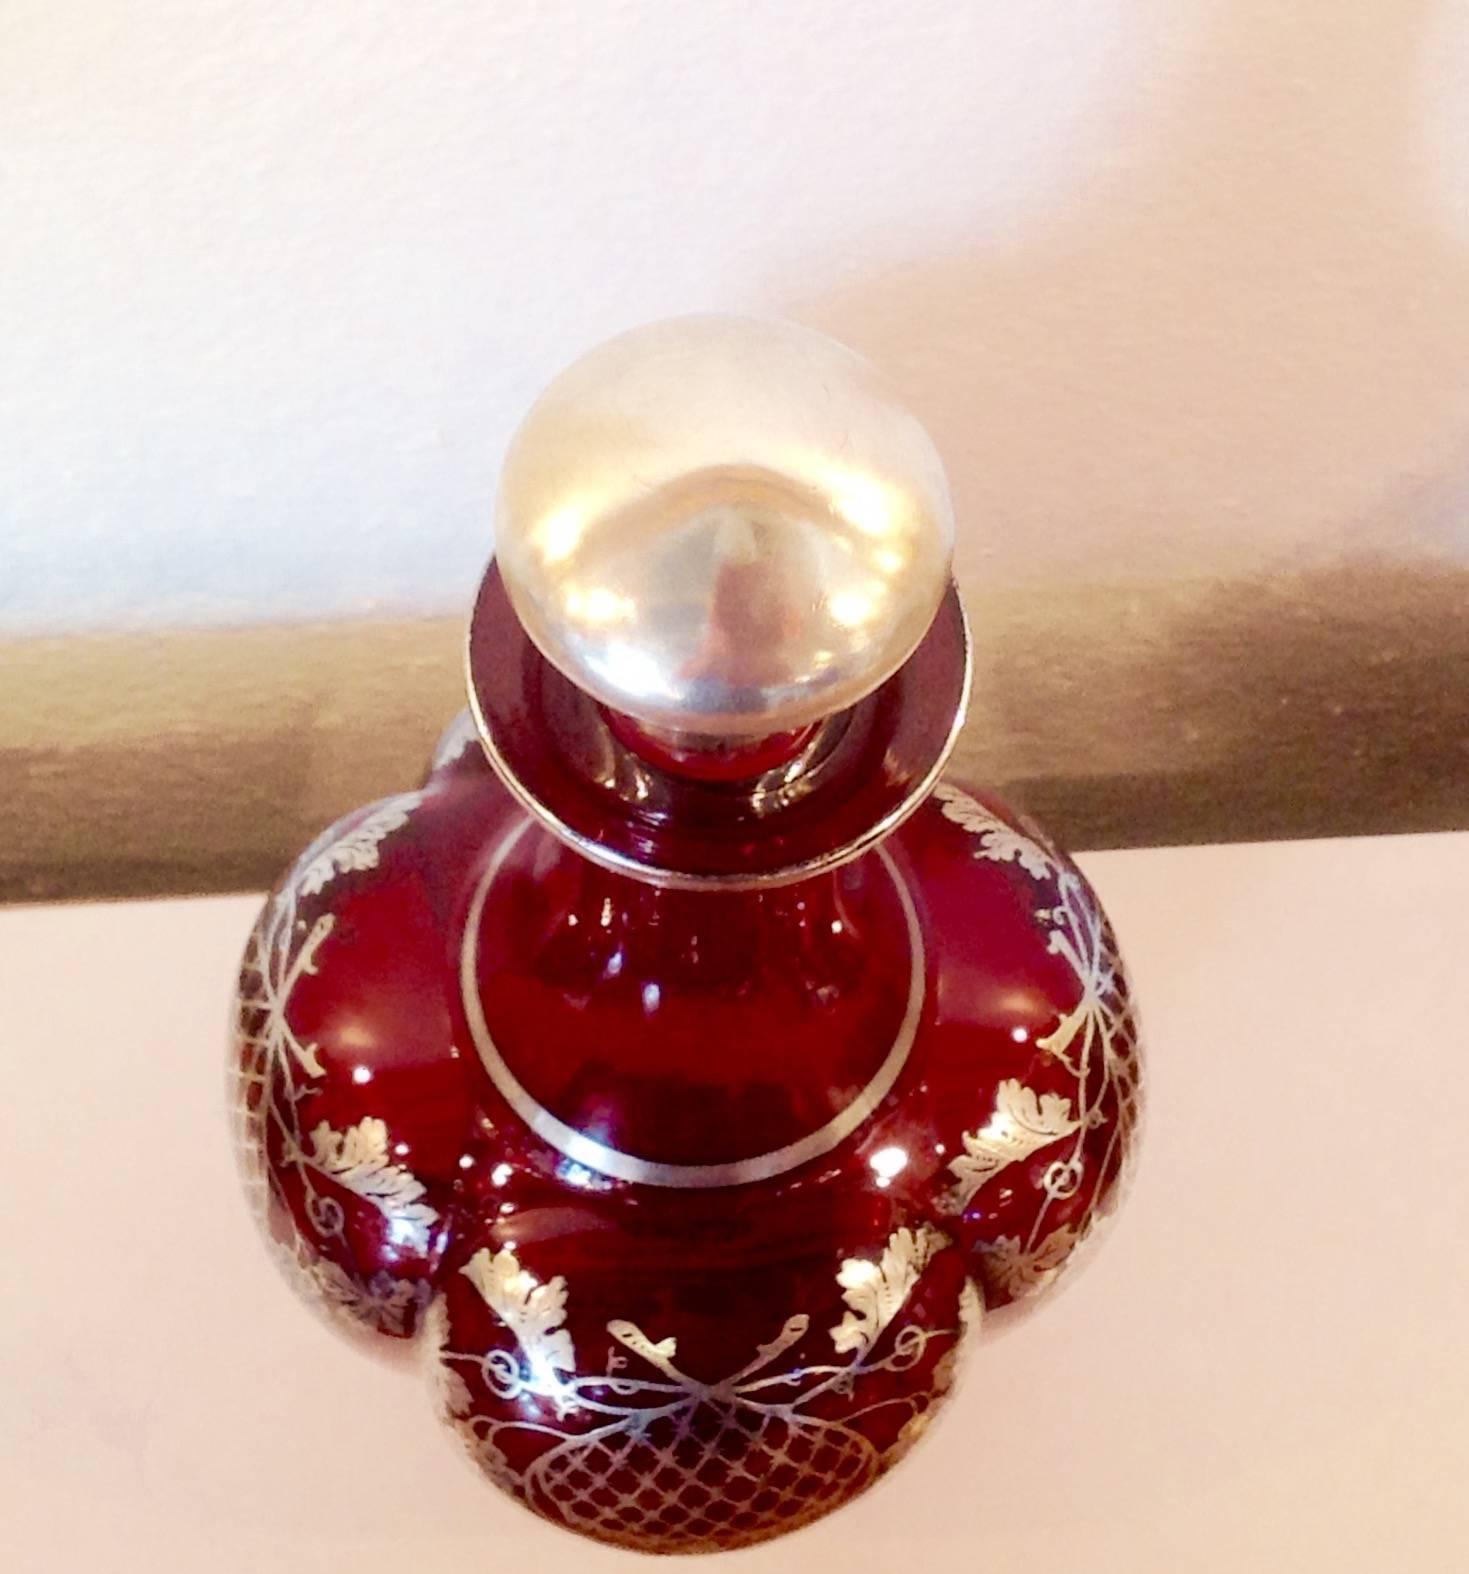 Early 1900s Art Nouveau ruby crystal/glass decanter with silver overlay and sterling silver stopper. Stopper has 